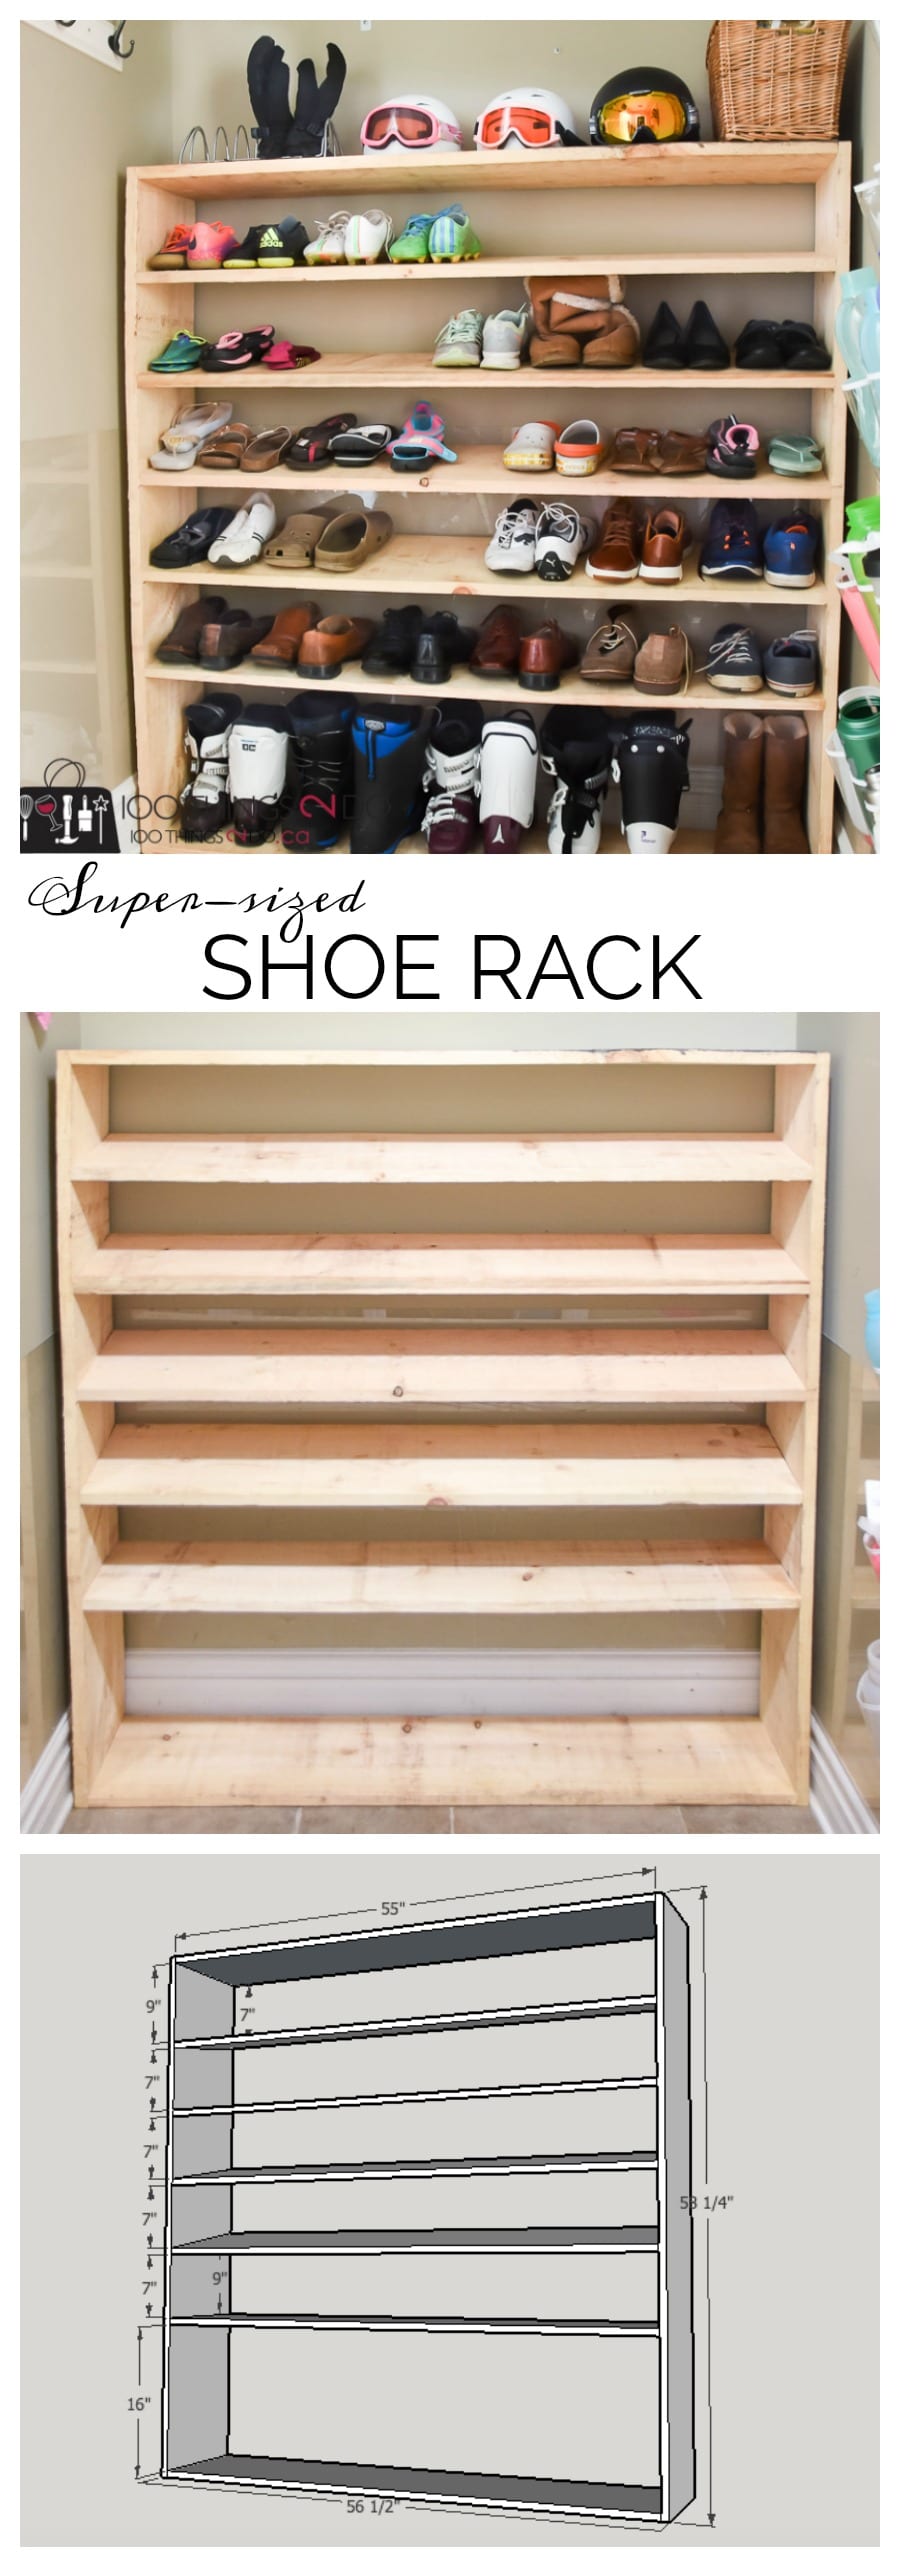 How To Make A Super Sized Shoe Rack On A Budget Unique shabby chic pallet wood floating shoe rack ideal storage. how to make a super sized shoe rack on